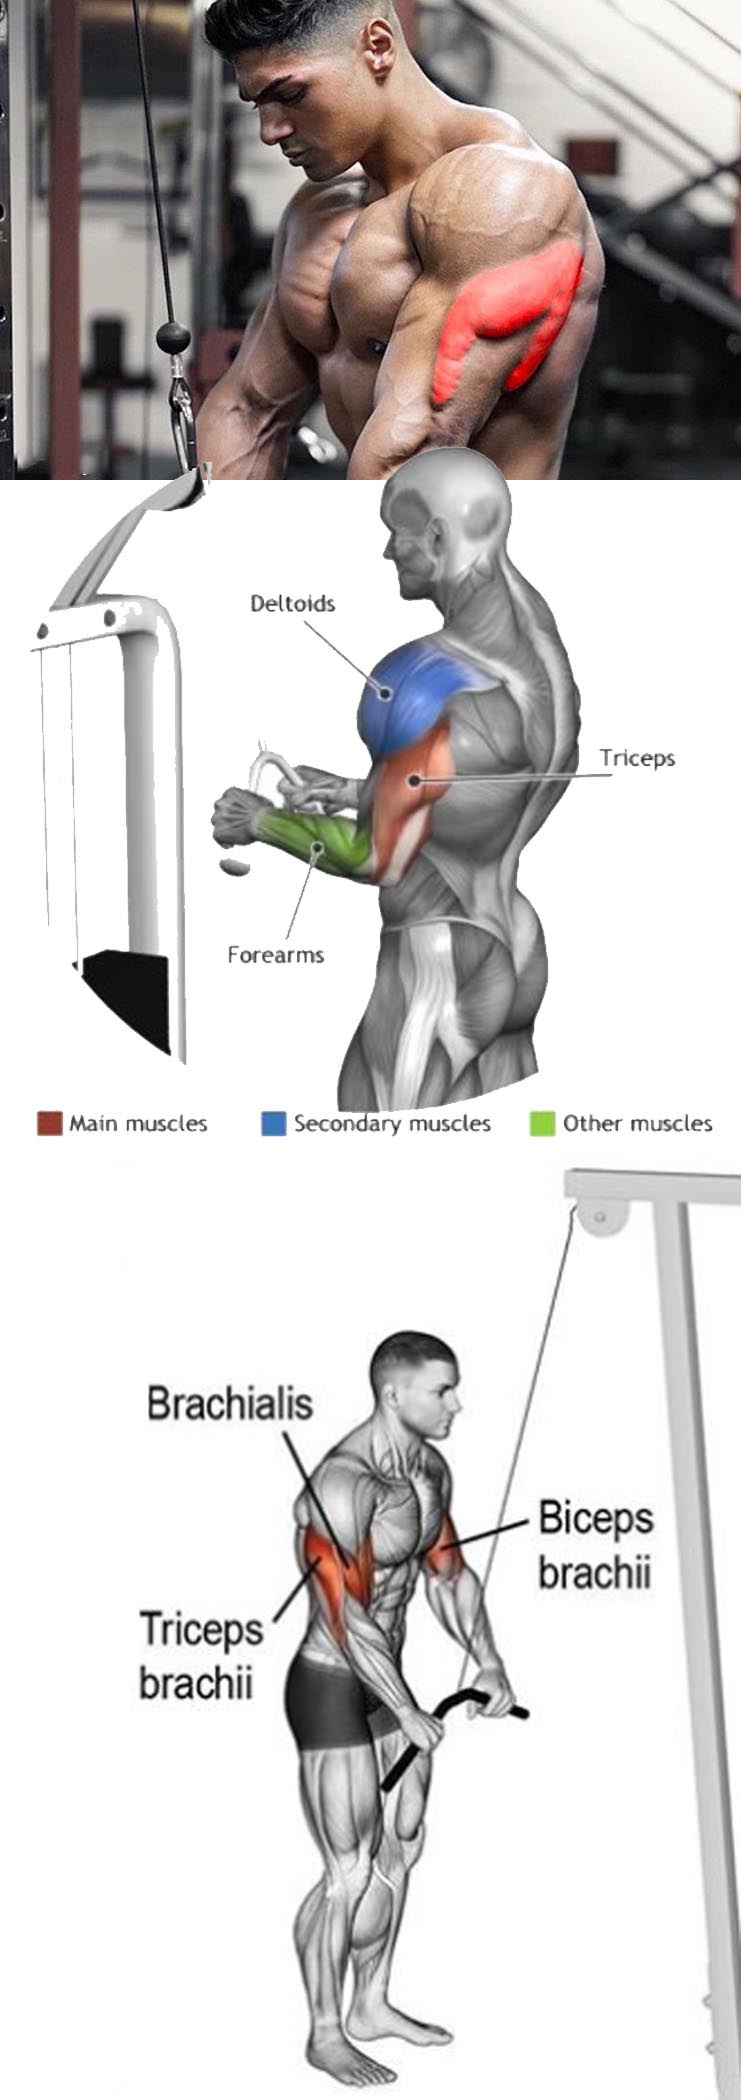 HOW TO TRICEP PUSHDOWN